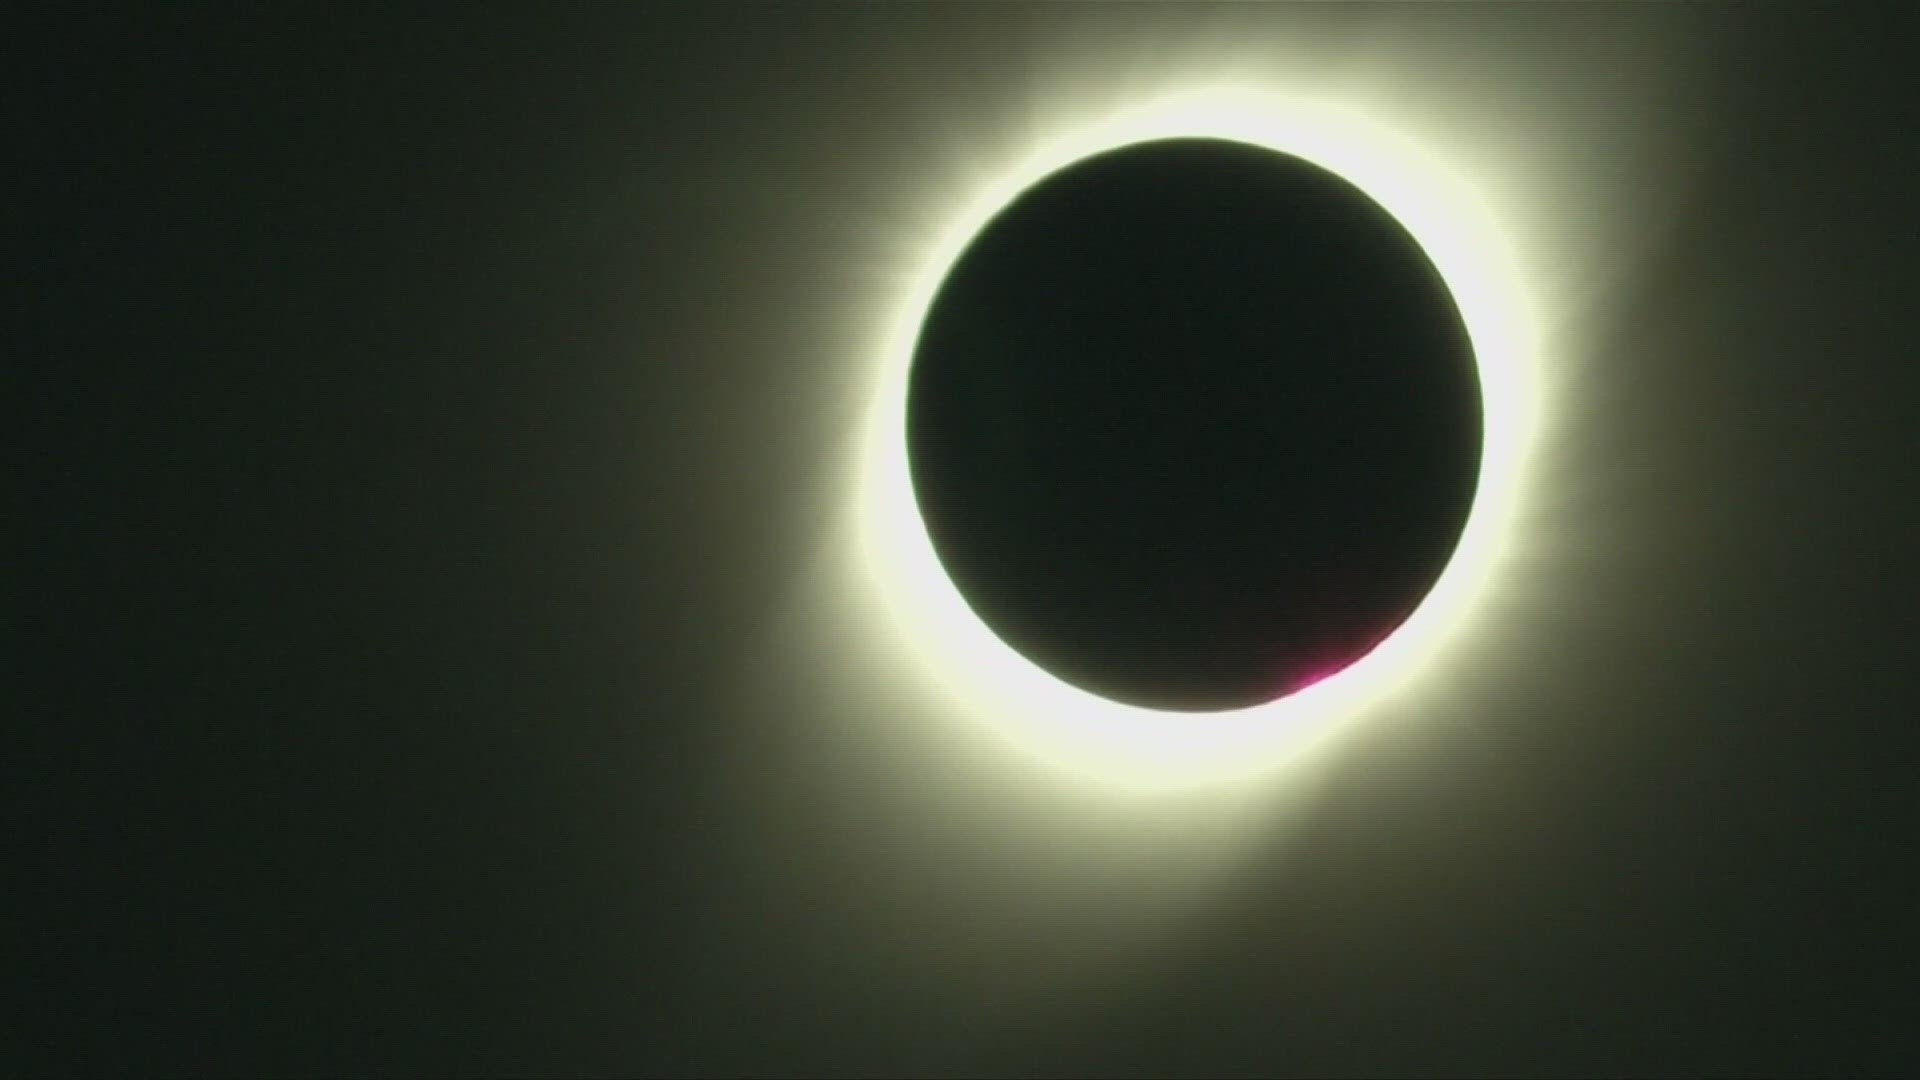 Amateur astronomers will use telescopes to capture photos of the sun's atmosphere, called the corona, during the April eclipse.